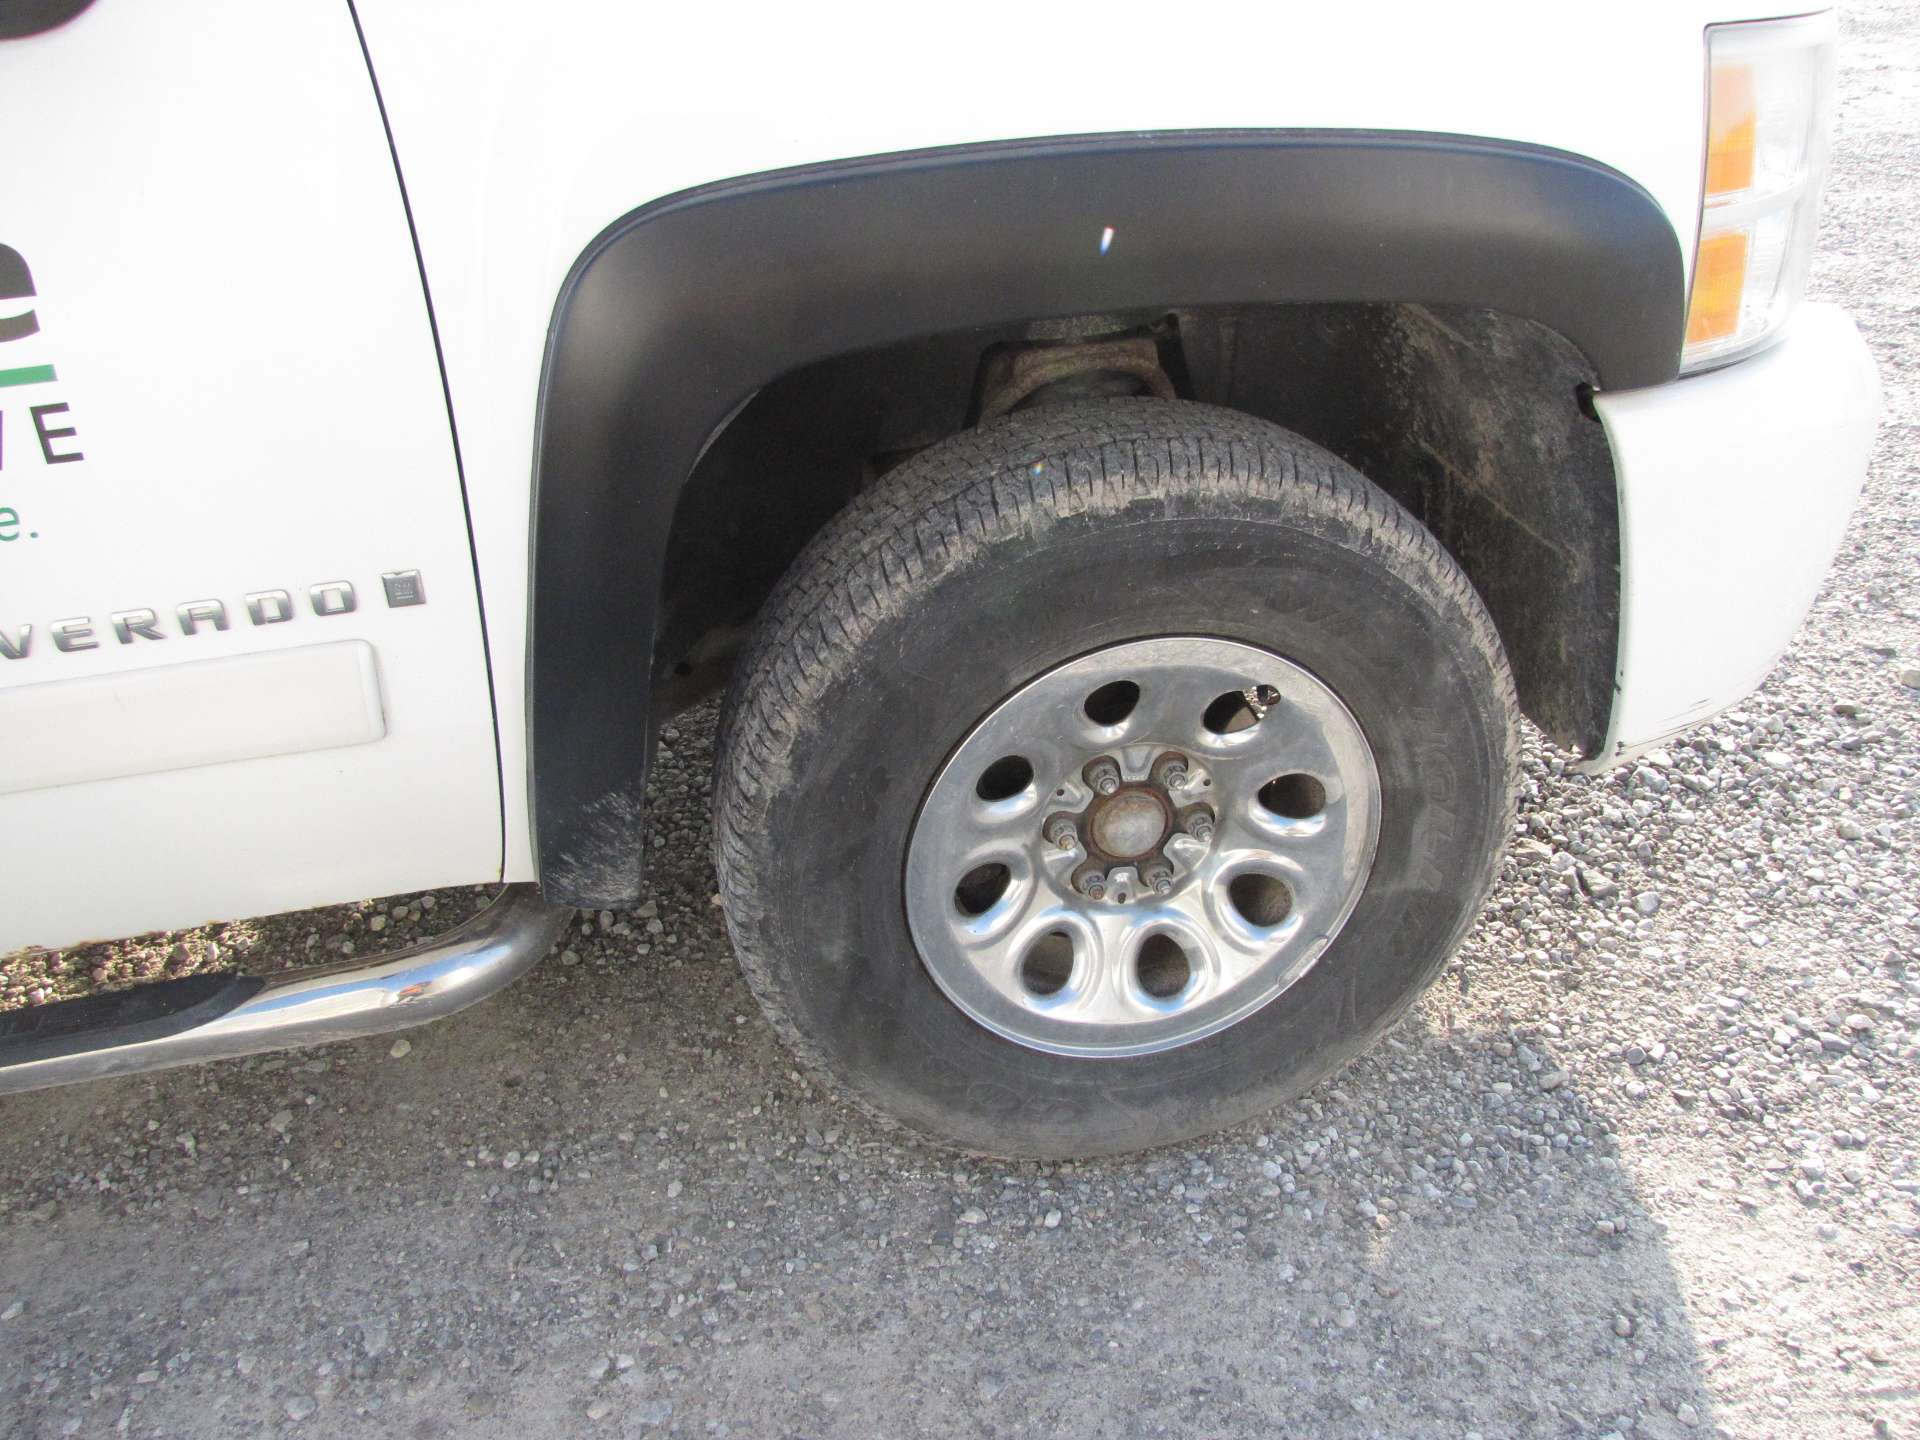 2008 Chevy Silverado 1500 LT Pickup Truck (CRACKED FRAME) - Image 33 of 43